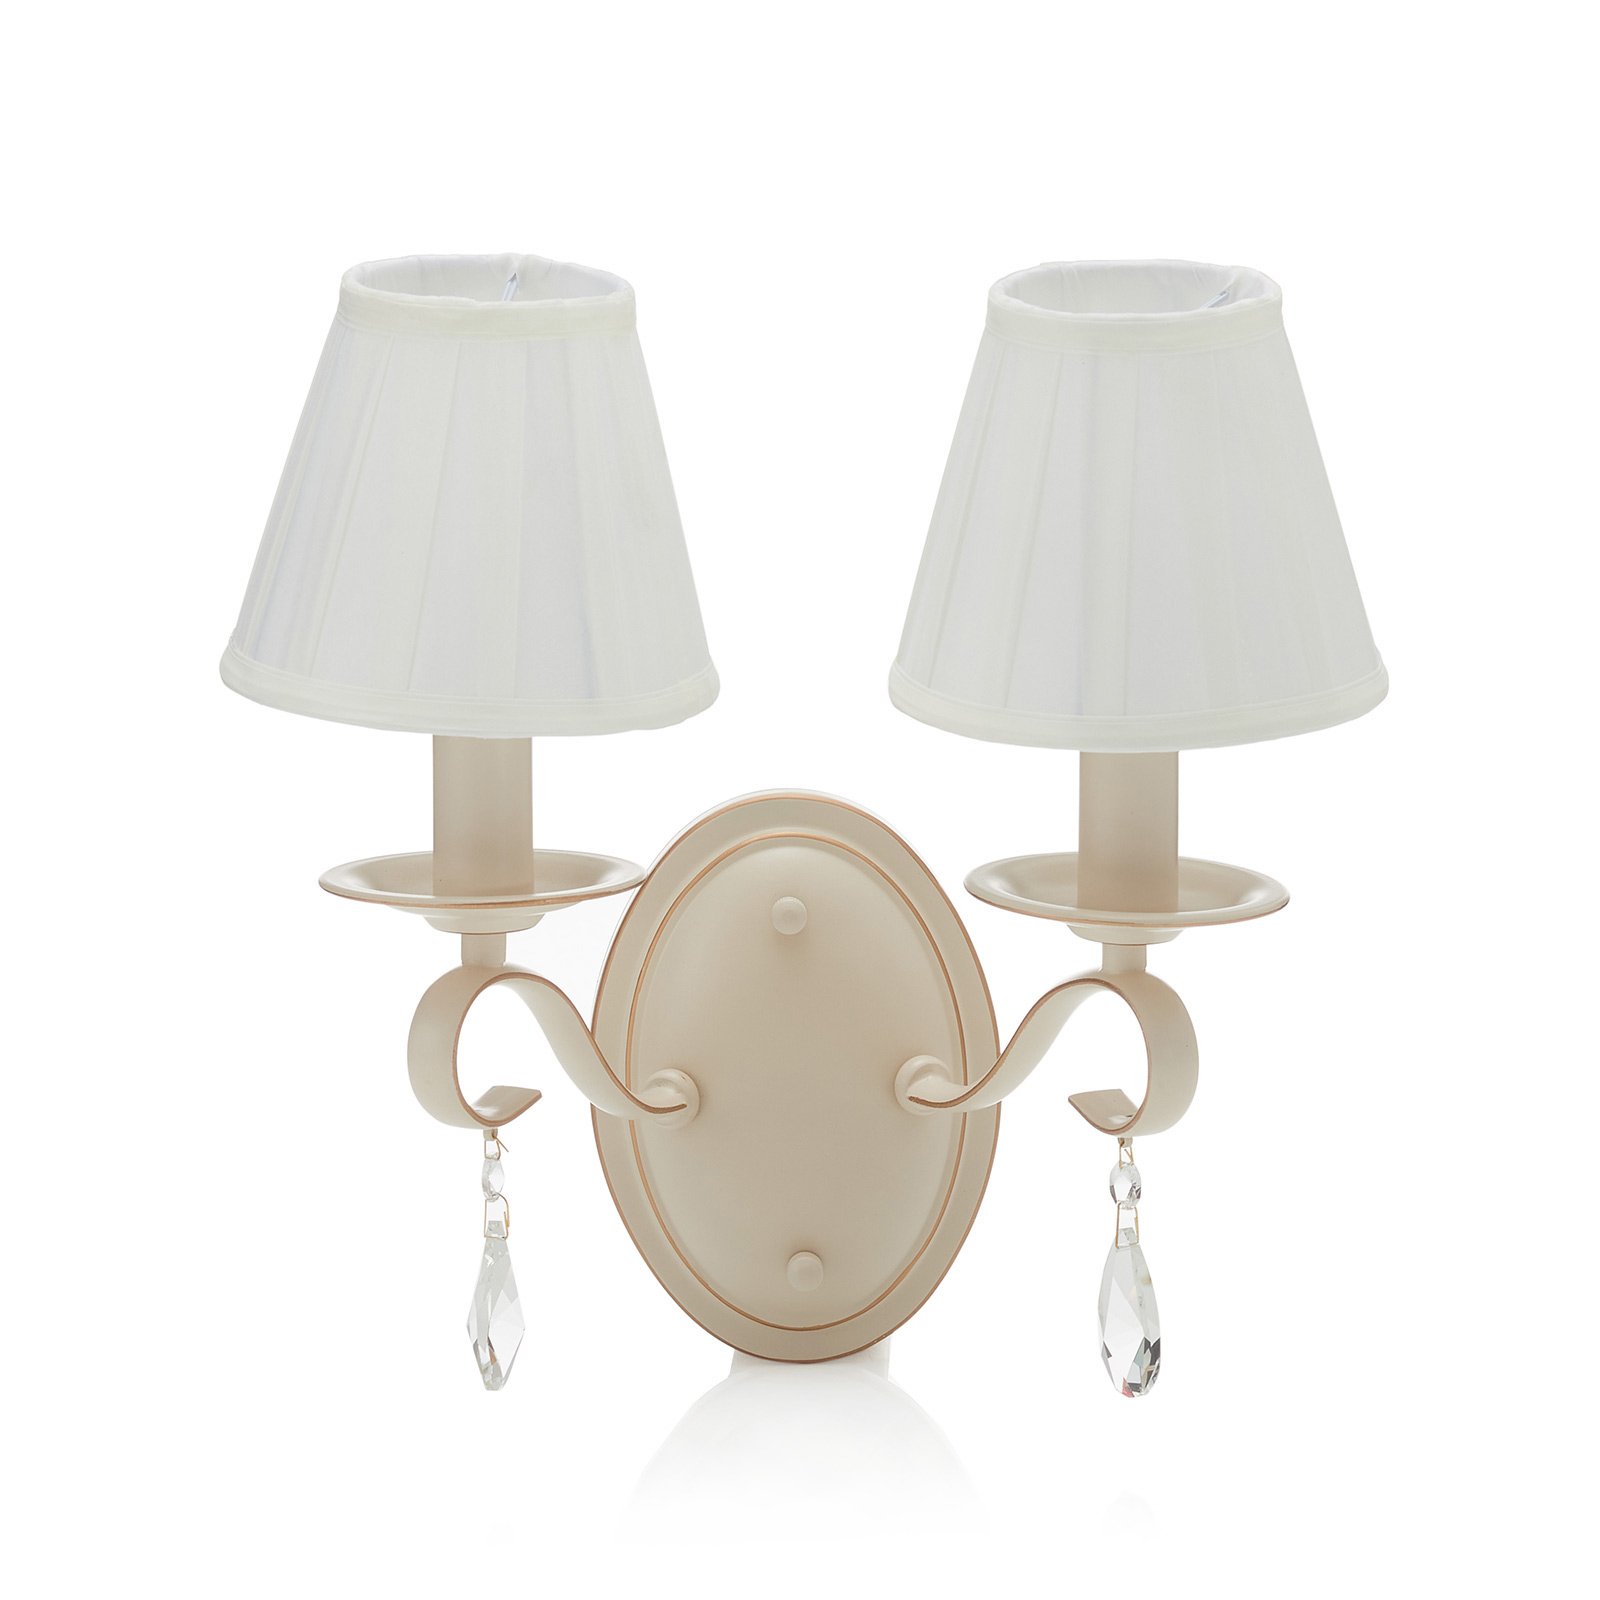 Wall light Brionia with satin shades